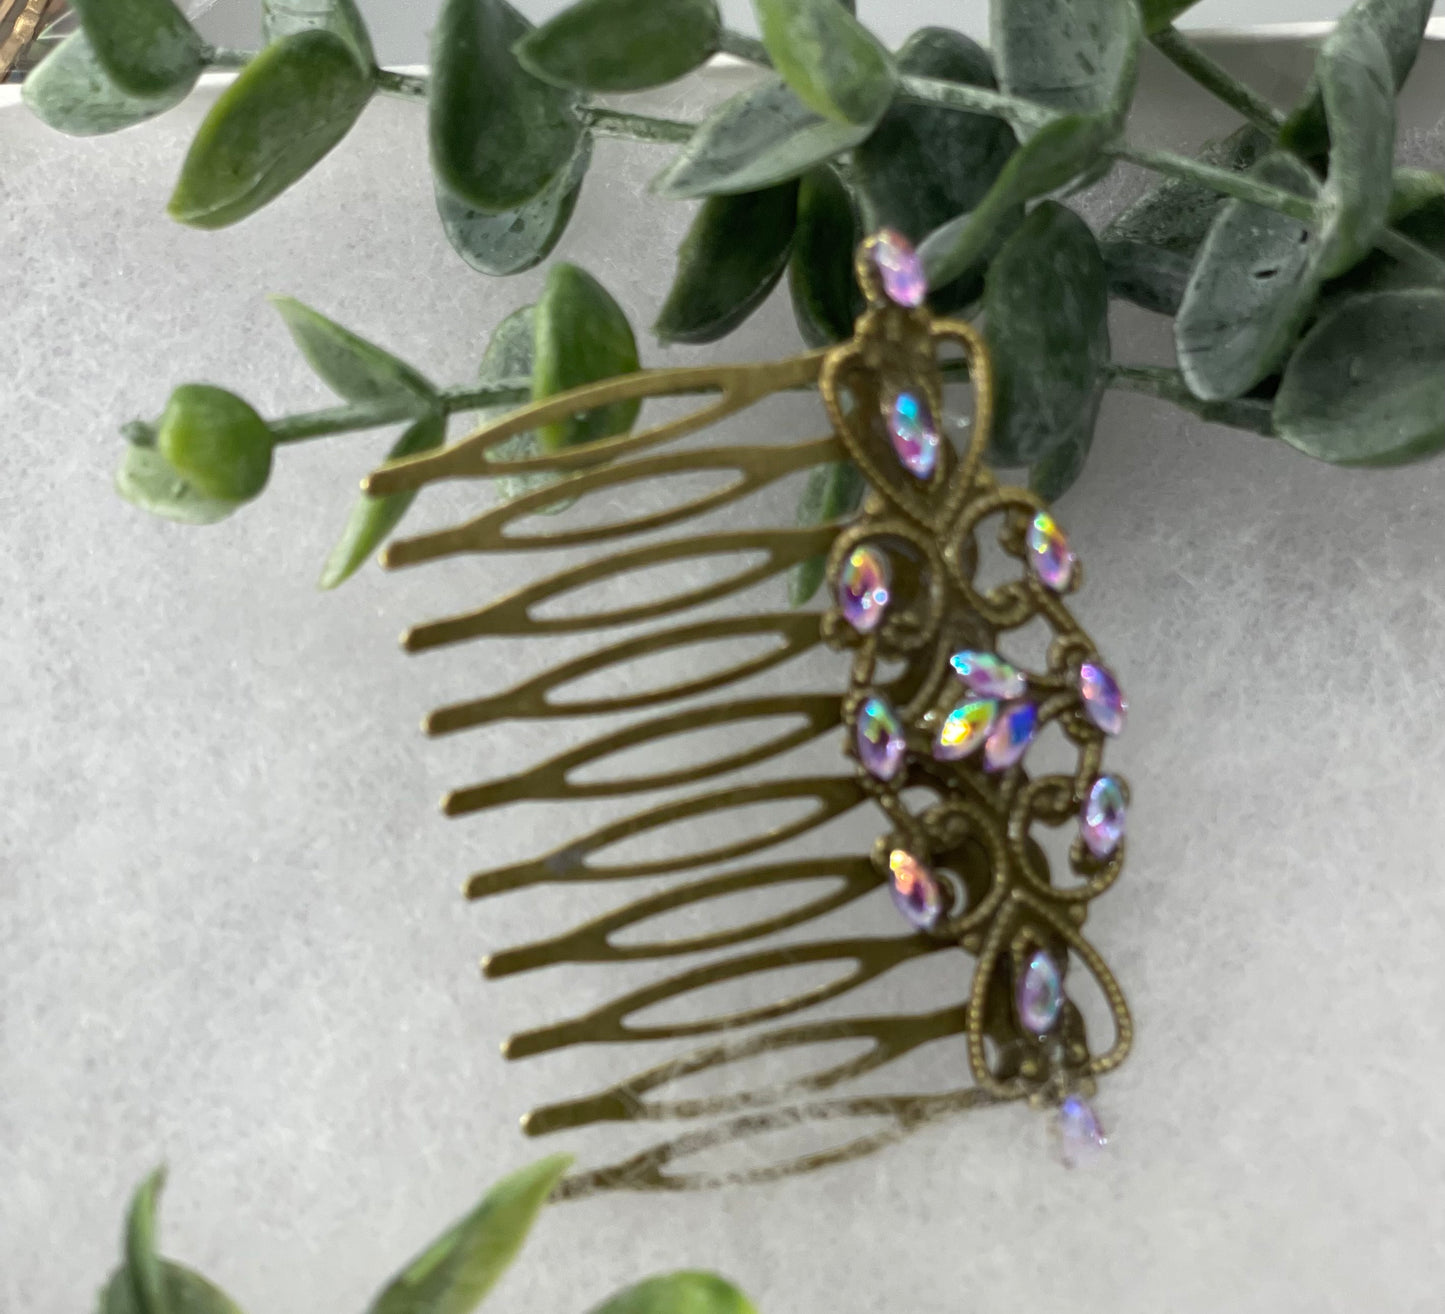 Lavender iridescent gel crystal vintage style antique hair accessories gift birthday event formal bridesmaid  2.5” Metal side Comb #255